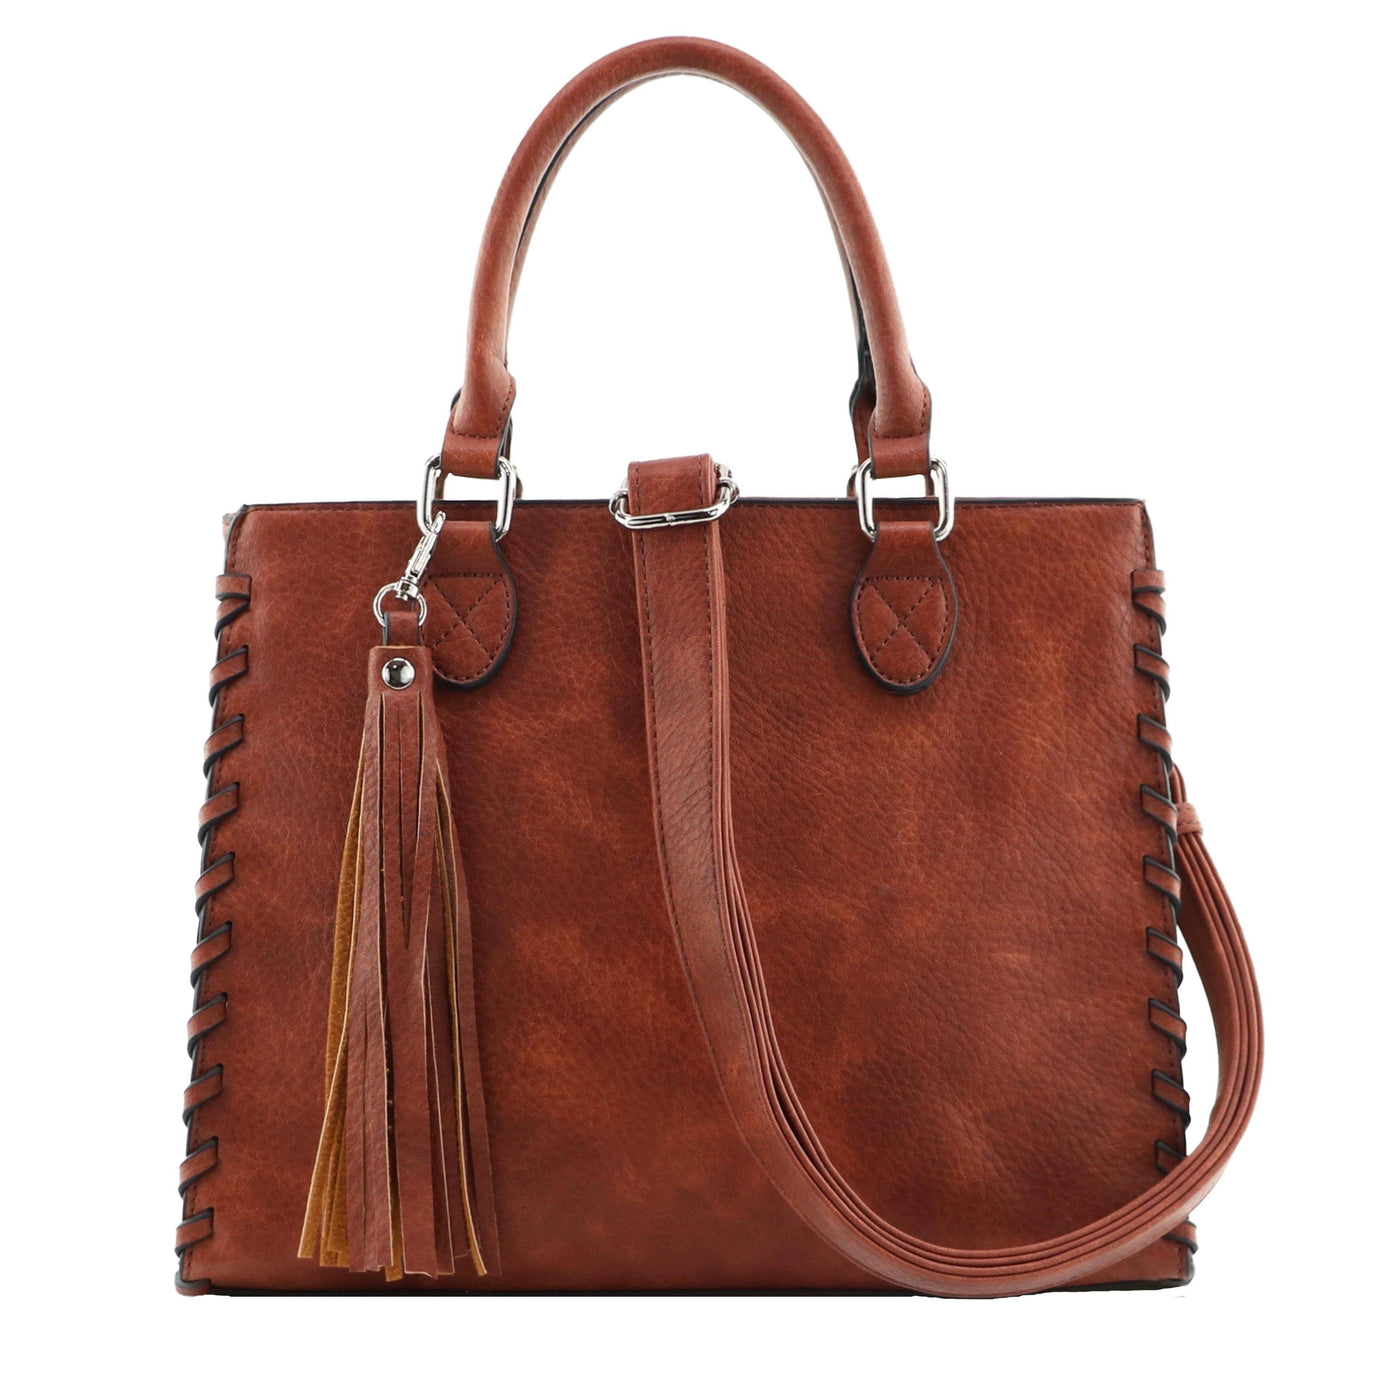 Lady Conceal Concealed Carry Purse Mahogany Concealed Carry Ann Satchel Bag by Lady Conceal